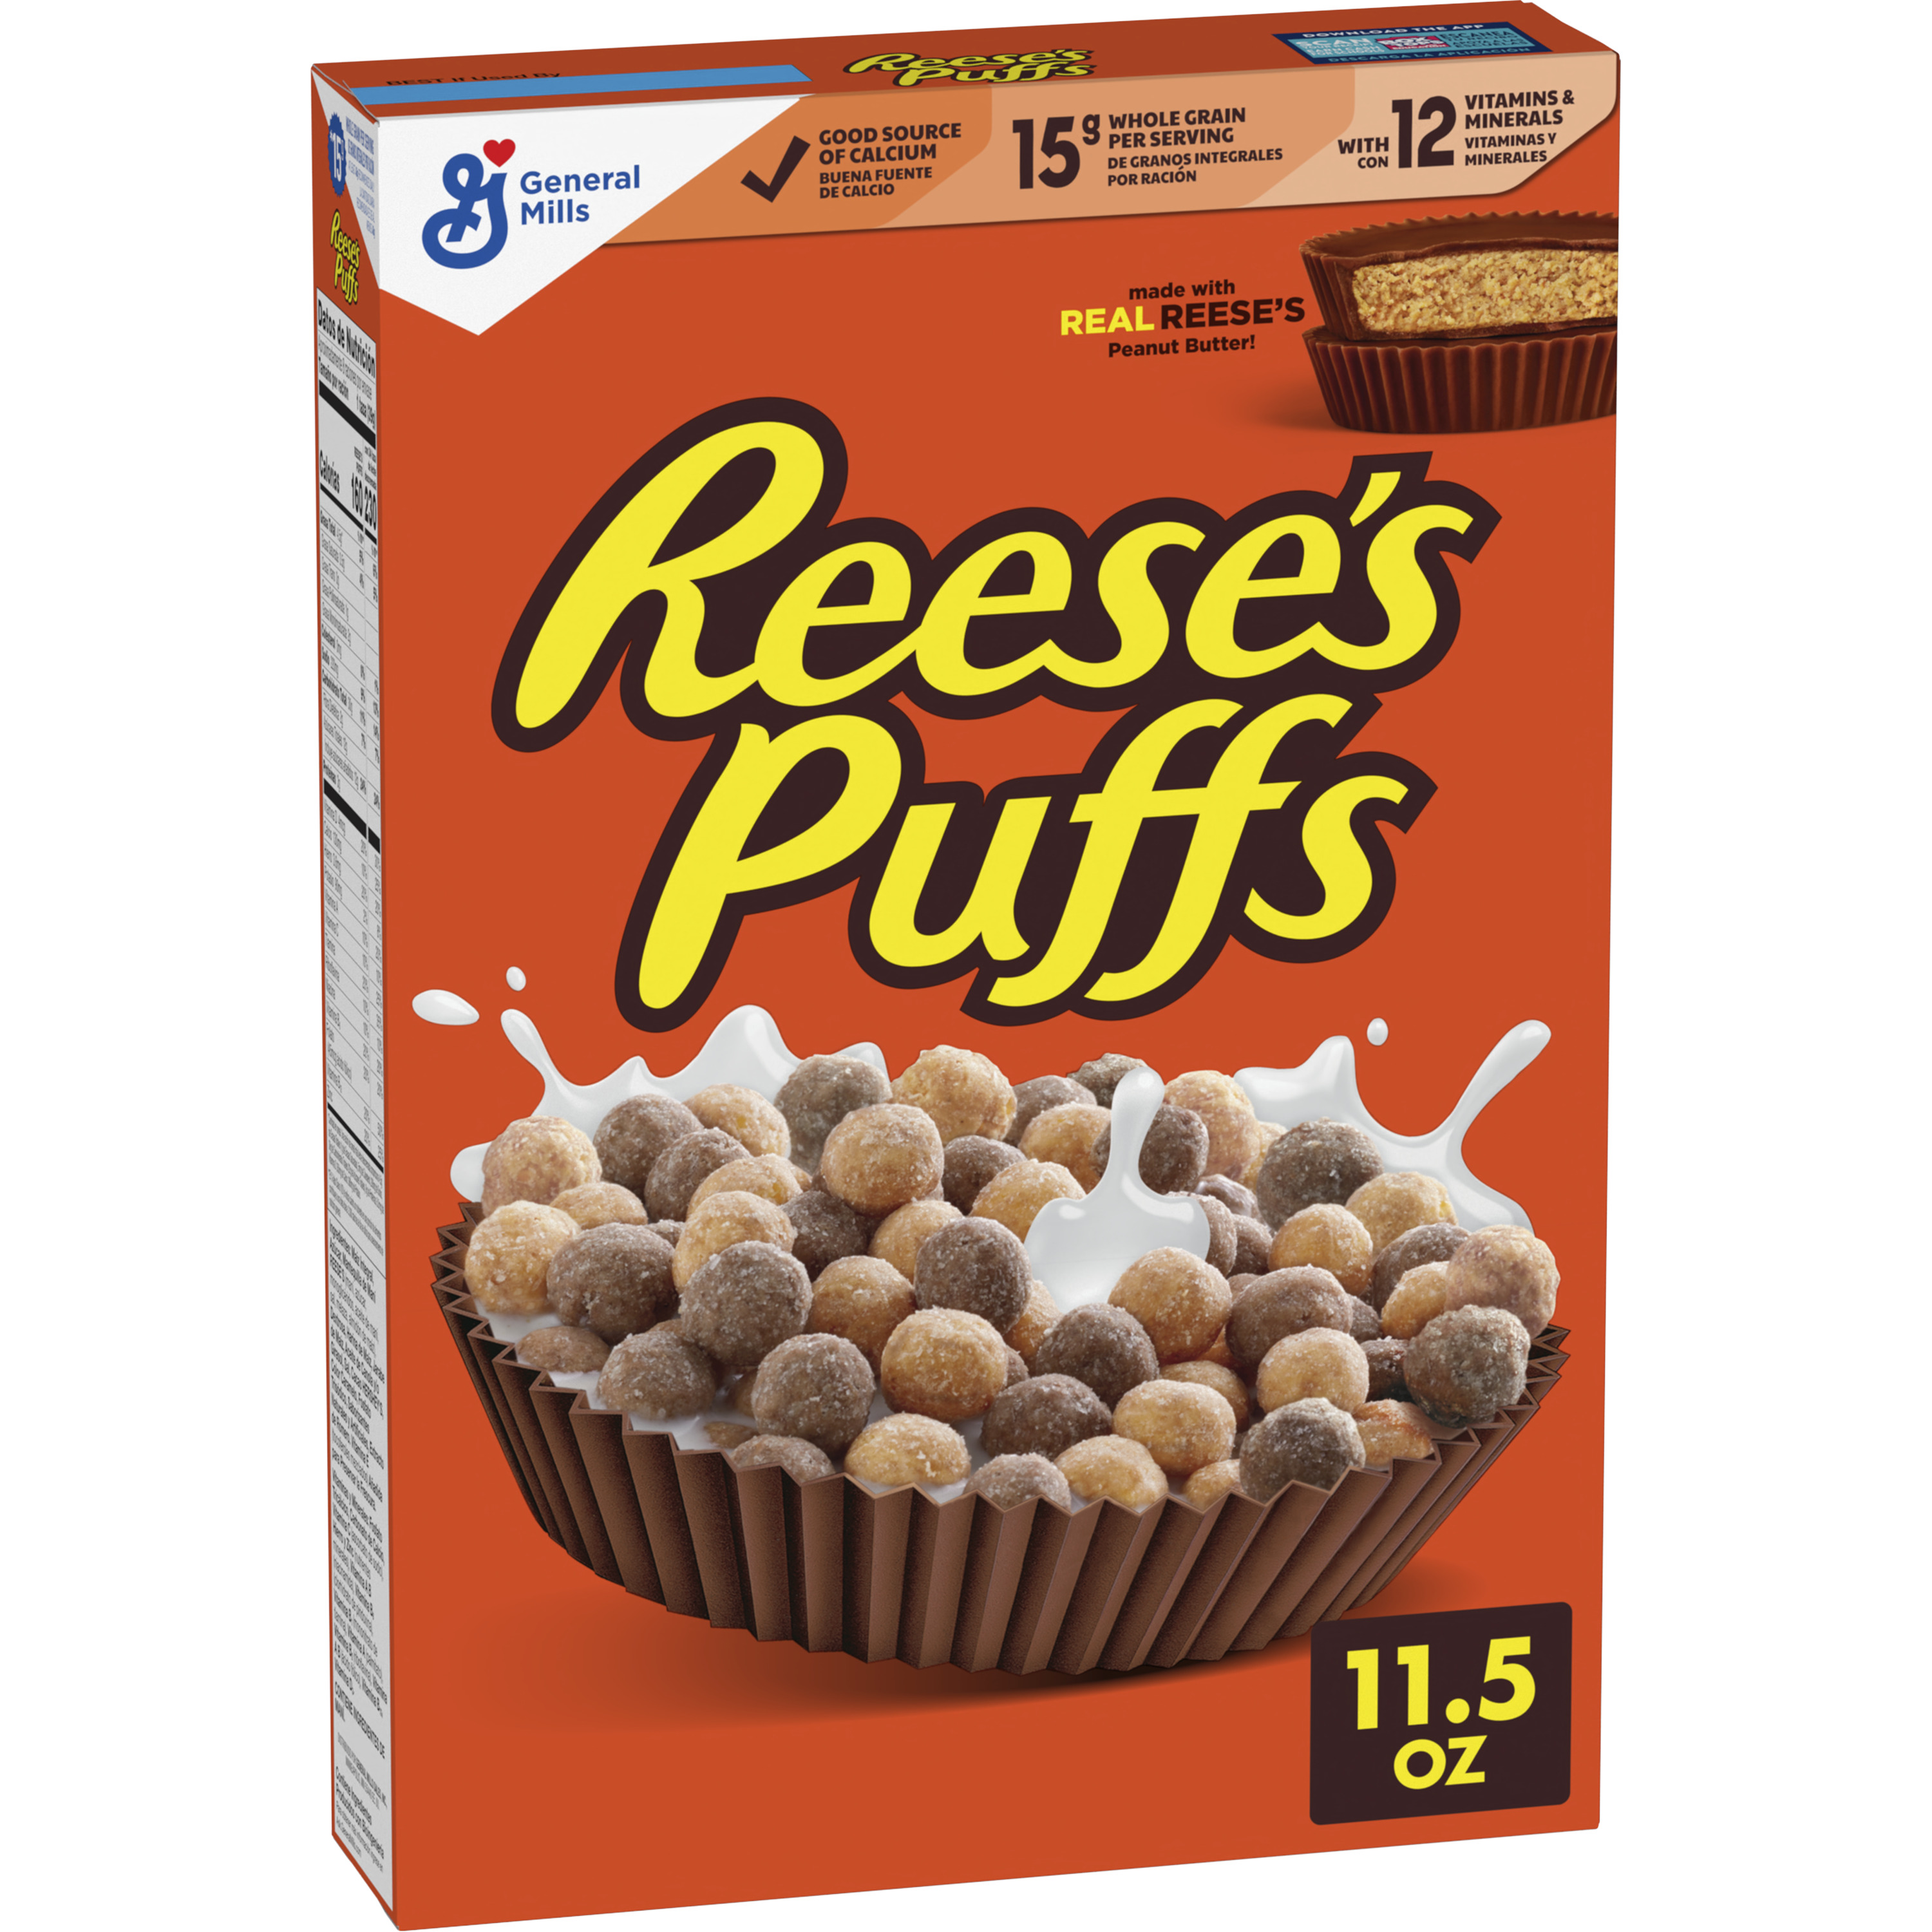 REESE's PUFFS Chocolatey Peanut Butter Cereal, Kid Breakfast Cereal, 11.5 oz - image 1 of 12